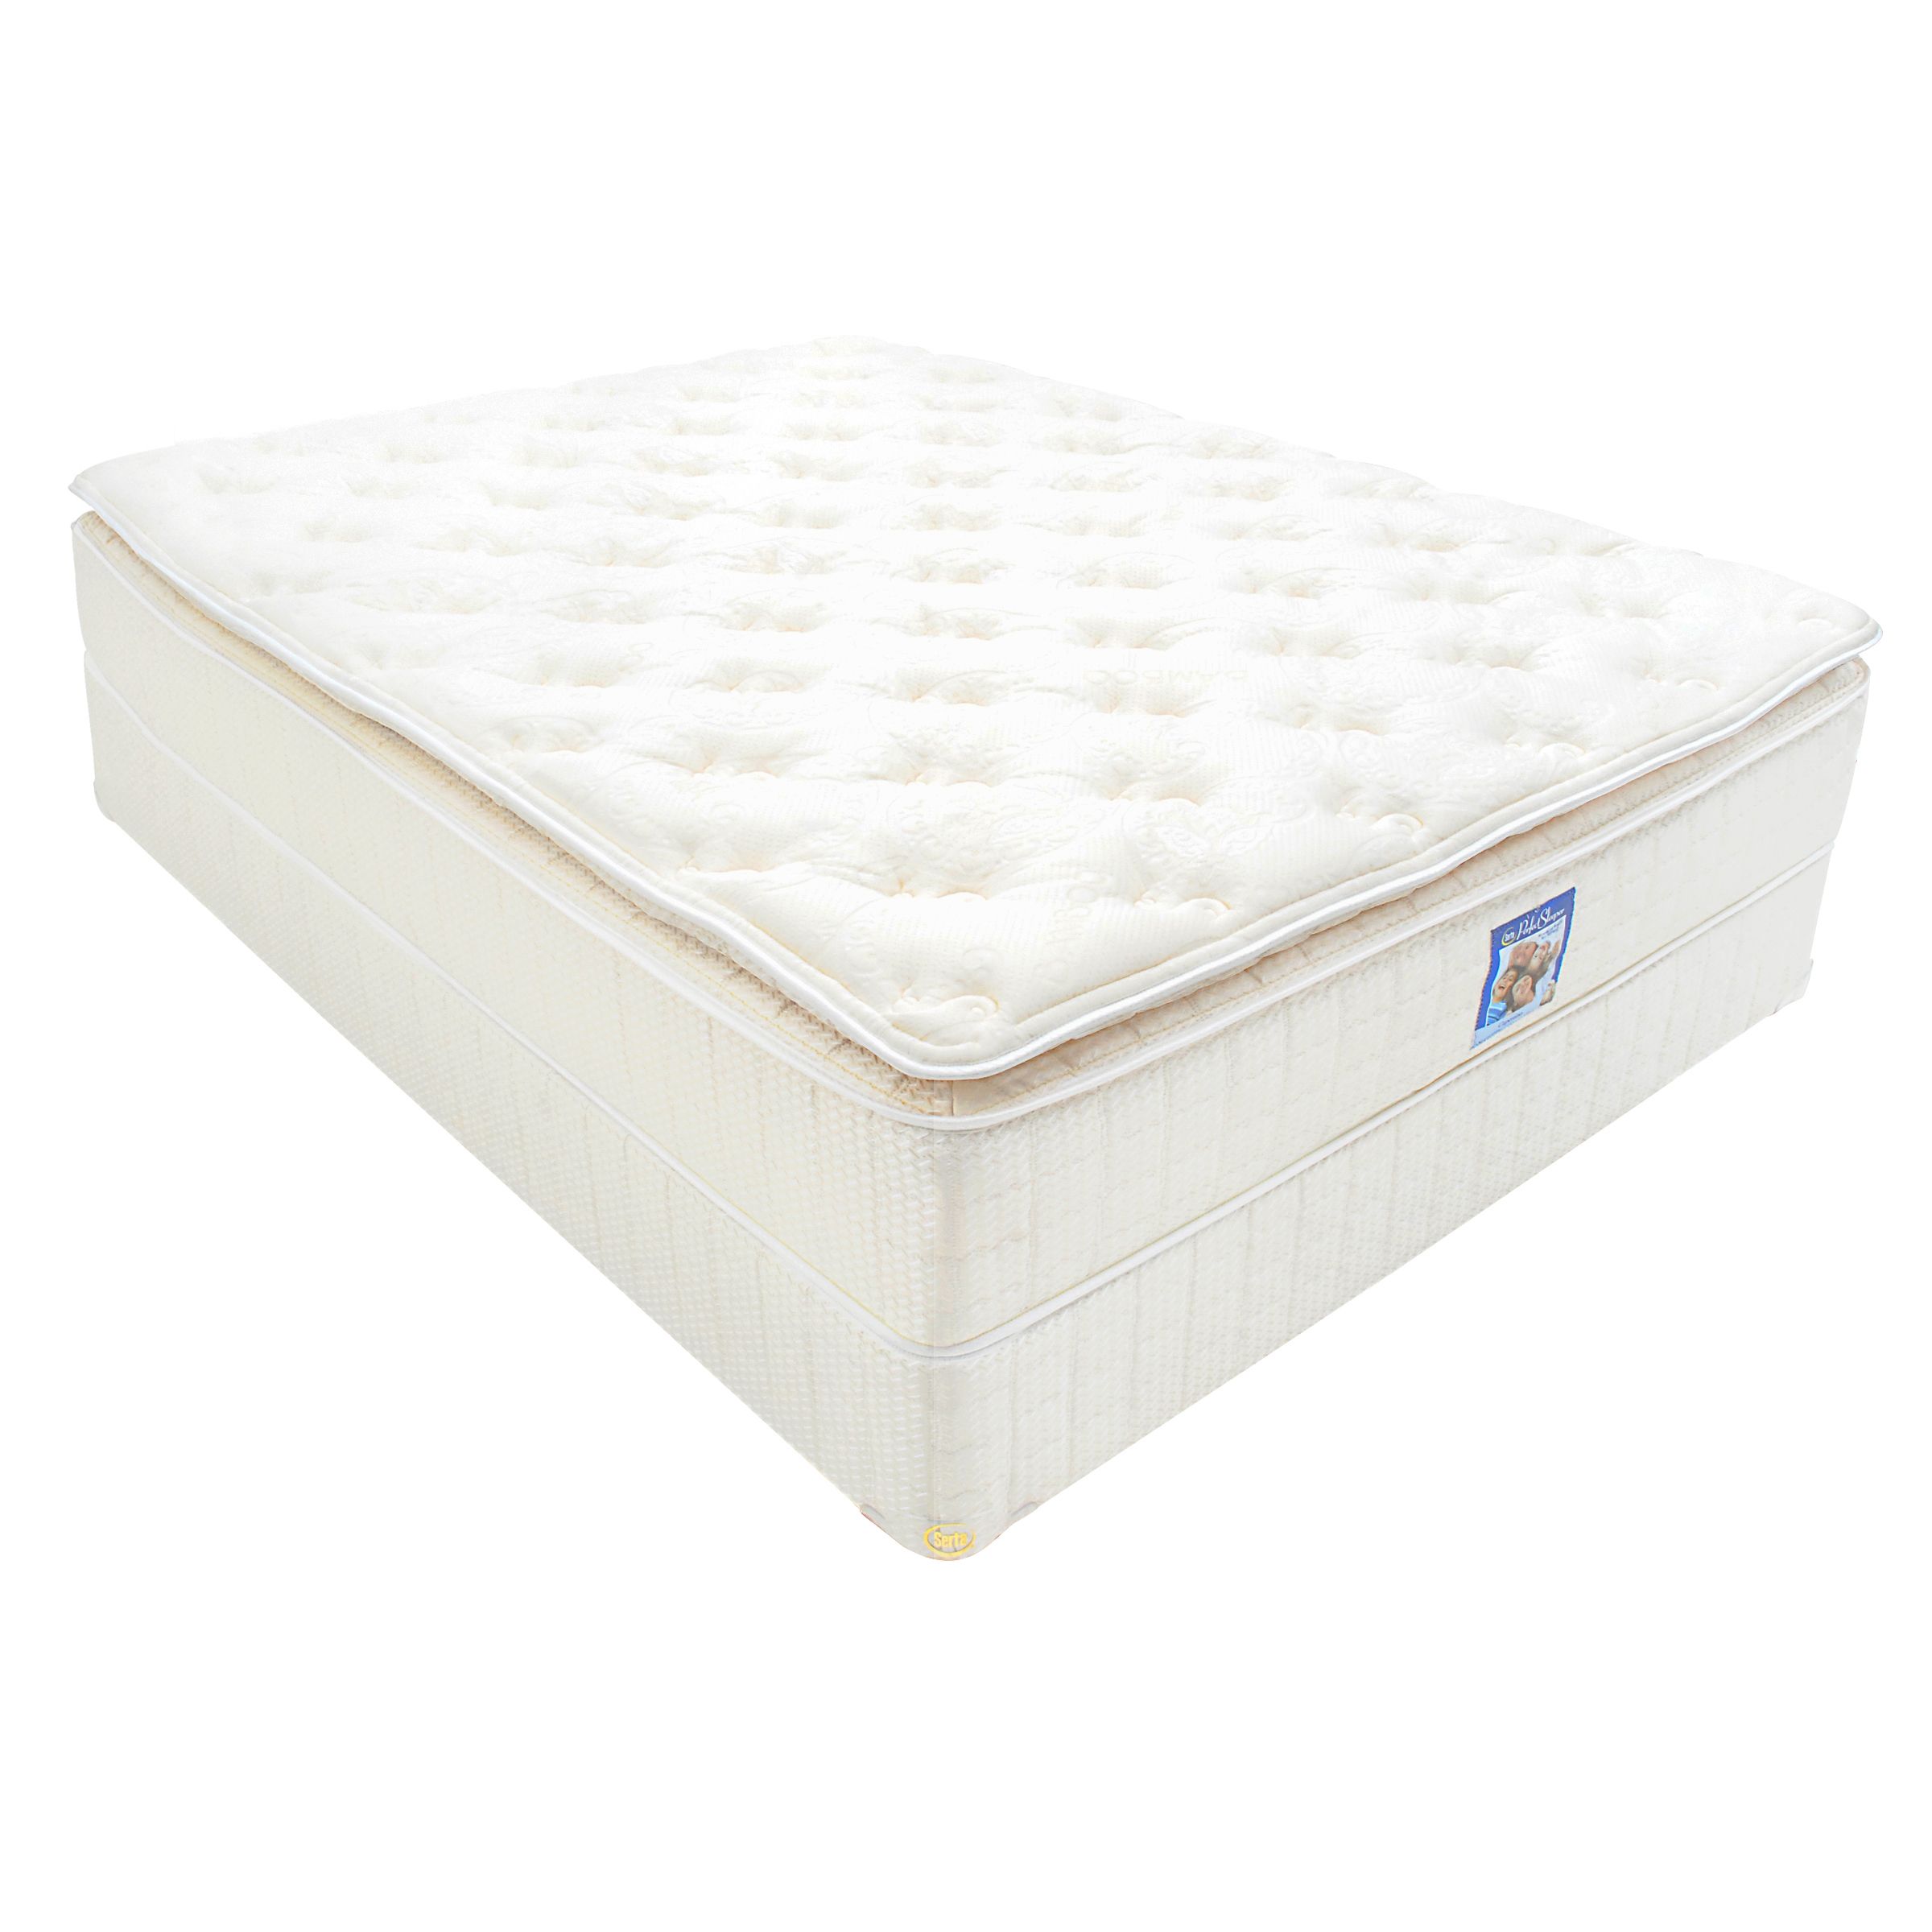 Perfect Sleeper Cupertino Select Pillow sears mattress outlet near me. sear...